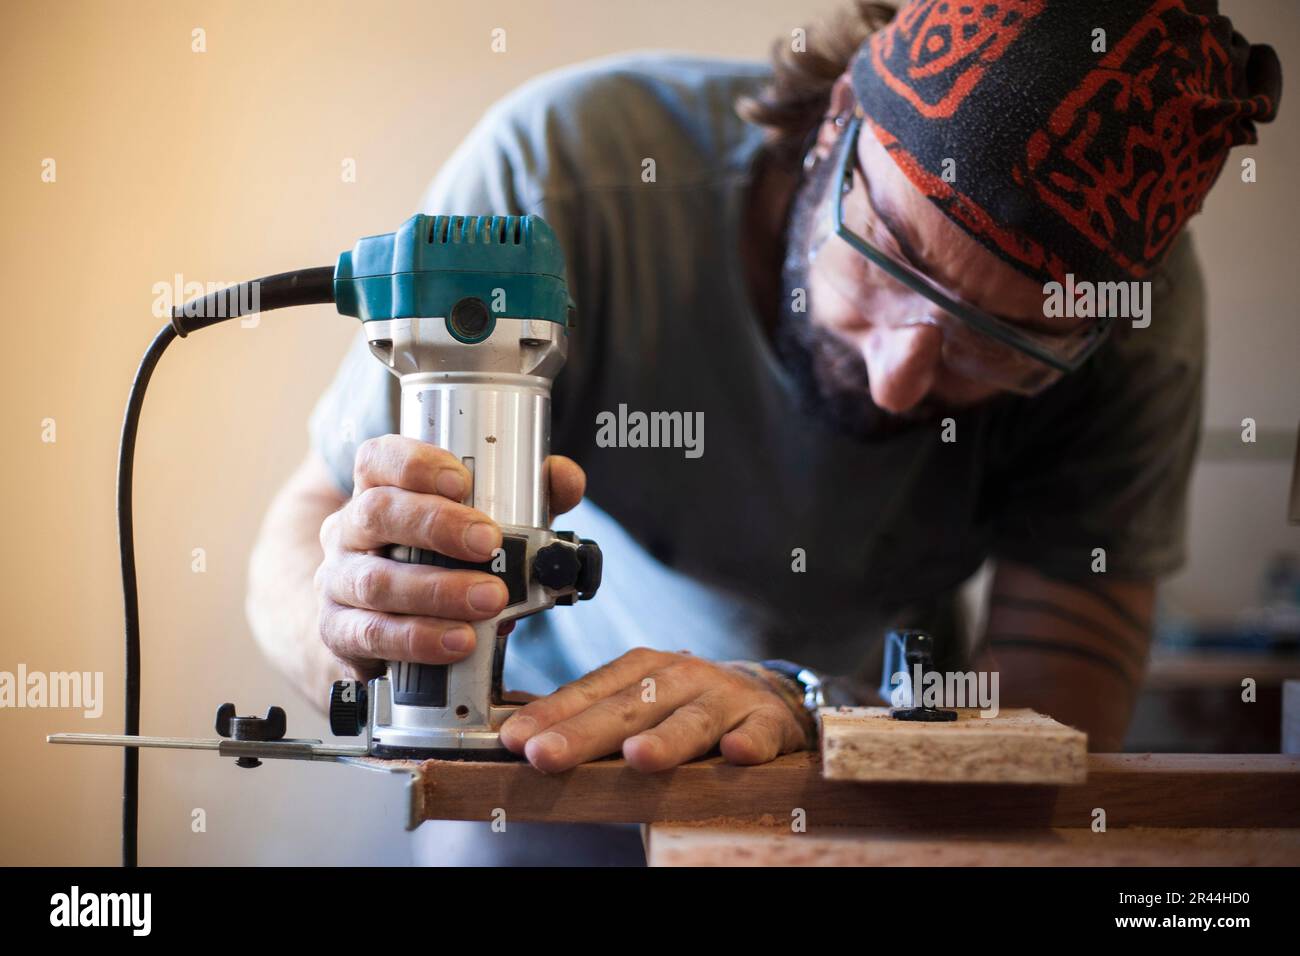 Intricate woodworking at its best as a skilled artisan uses a router to shape and mold the wood with meticulous precision. Stock Photo